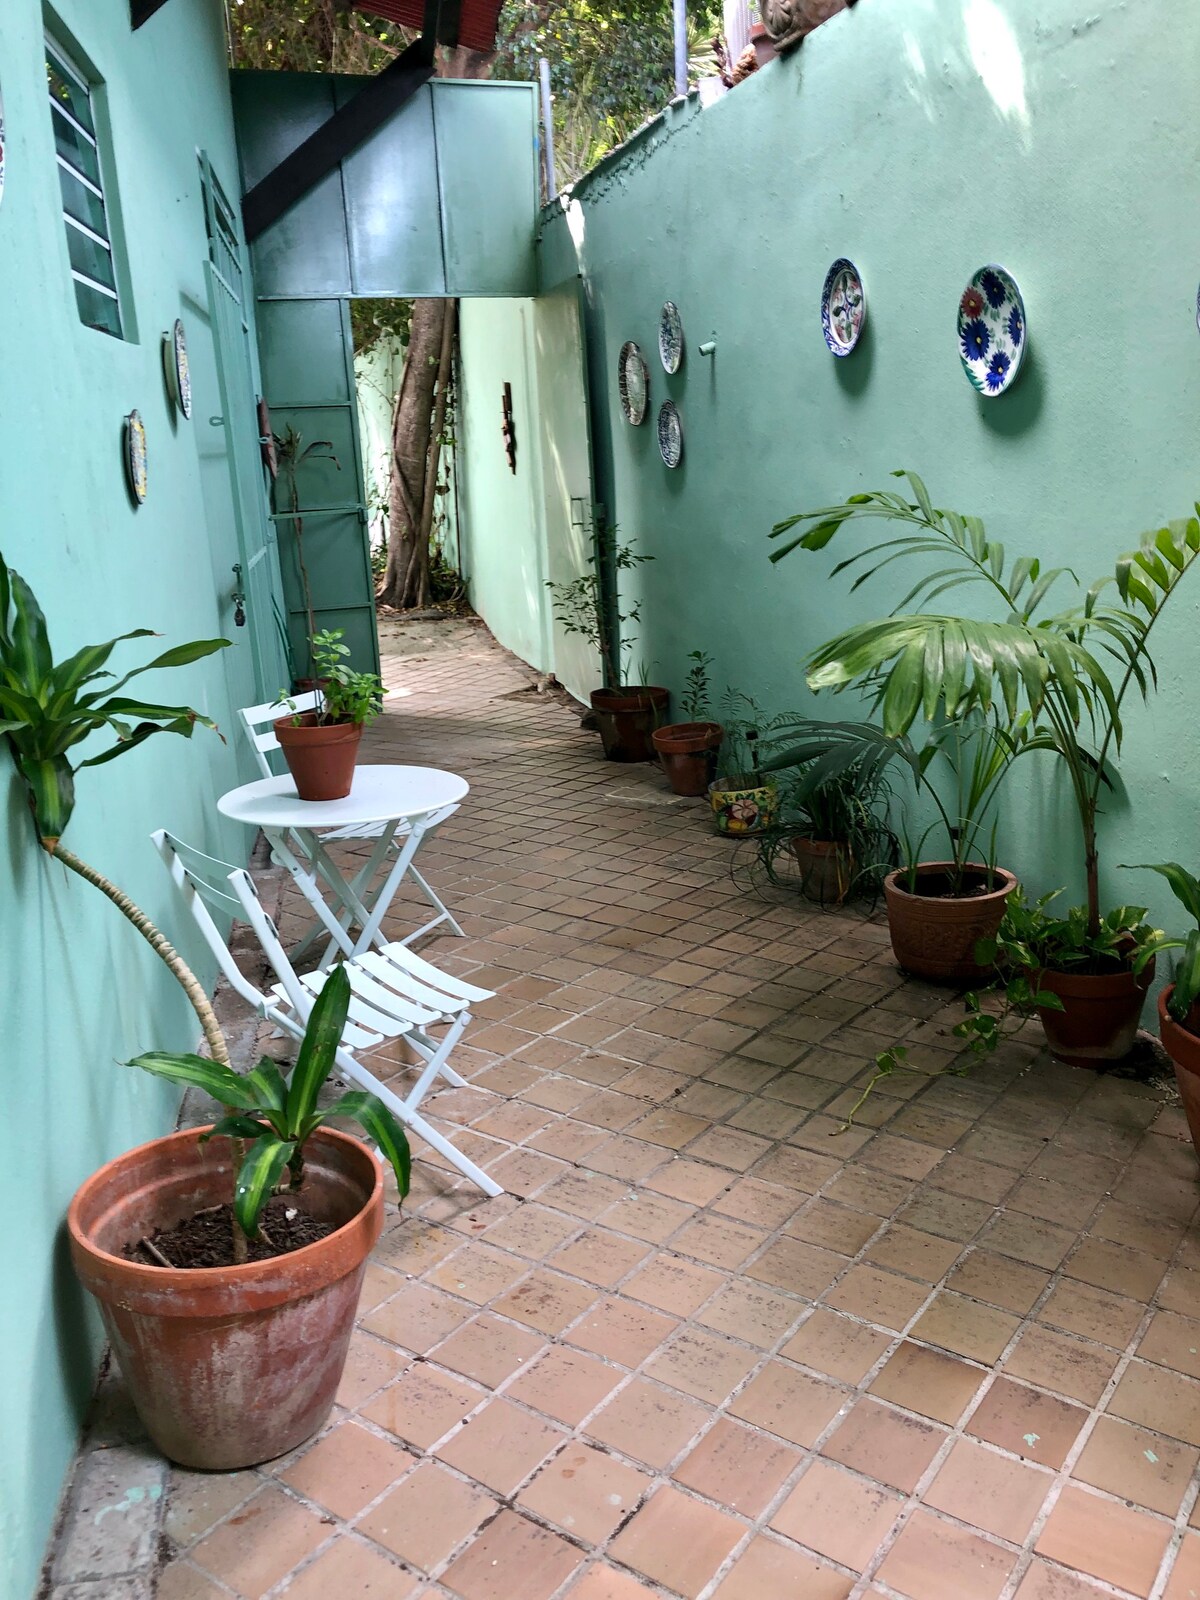 Apartment in City Center, #2703 Jobos St., Ponce.